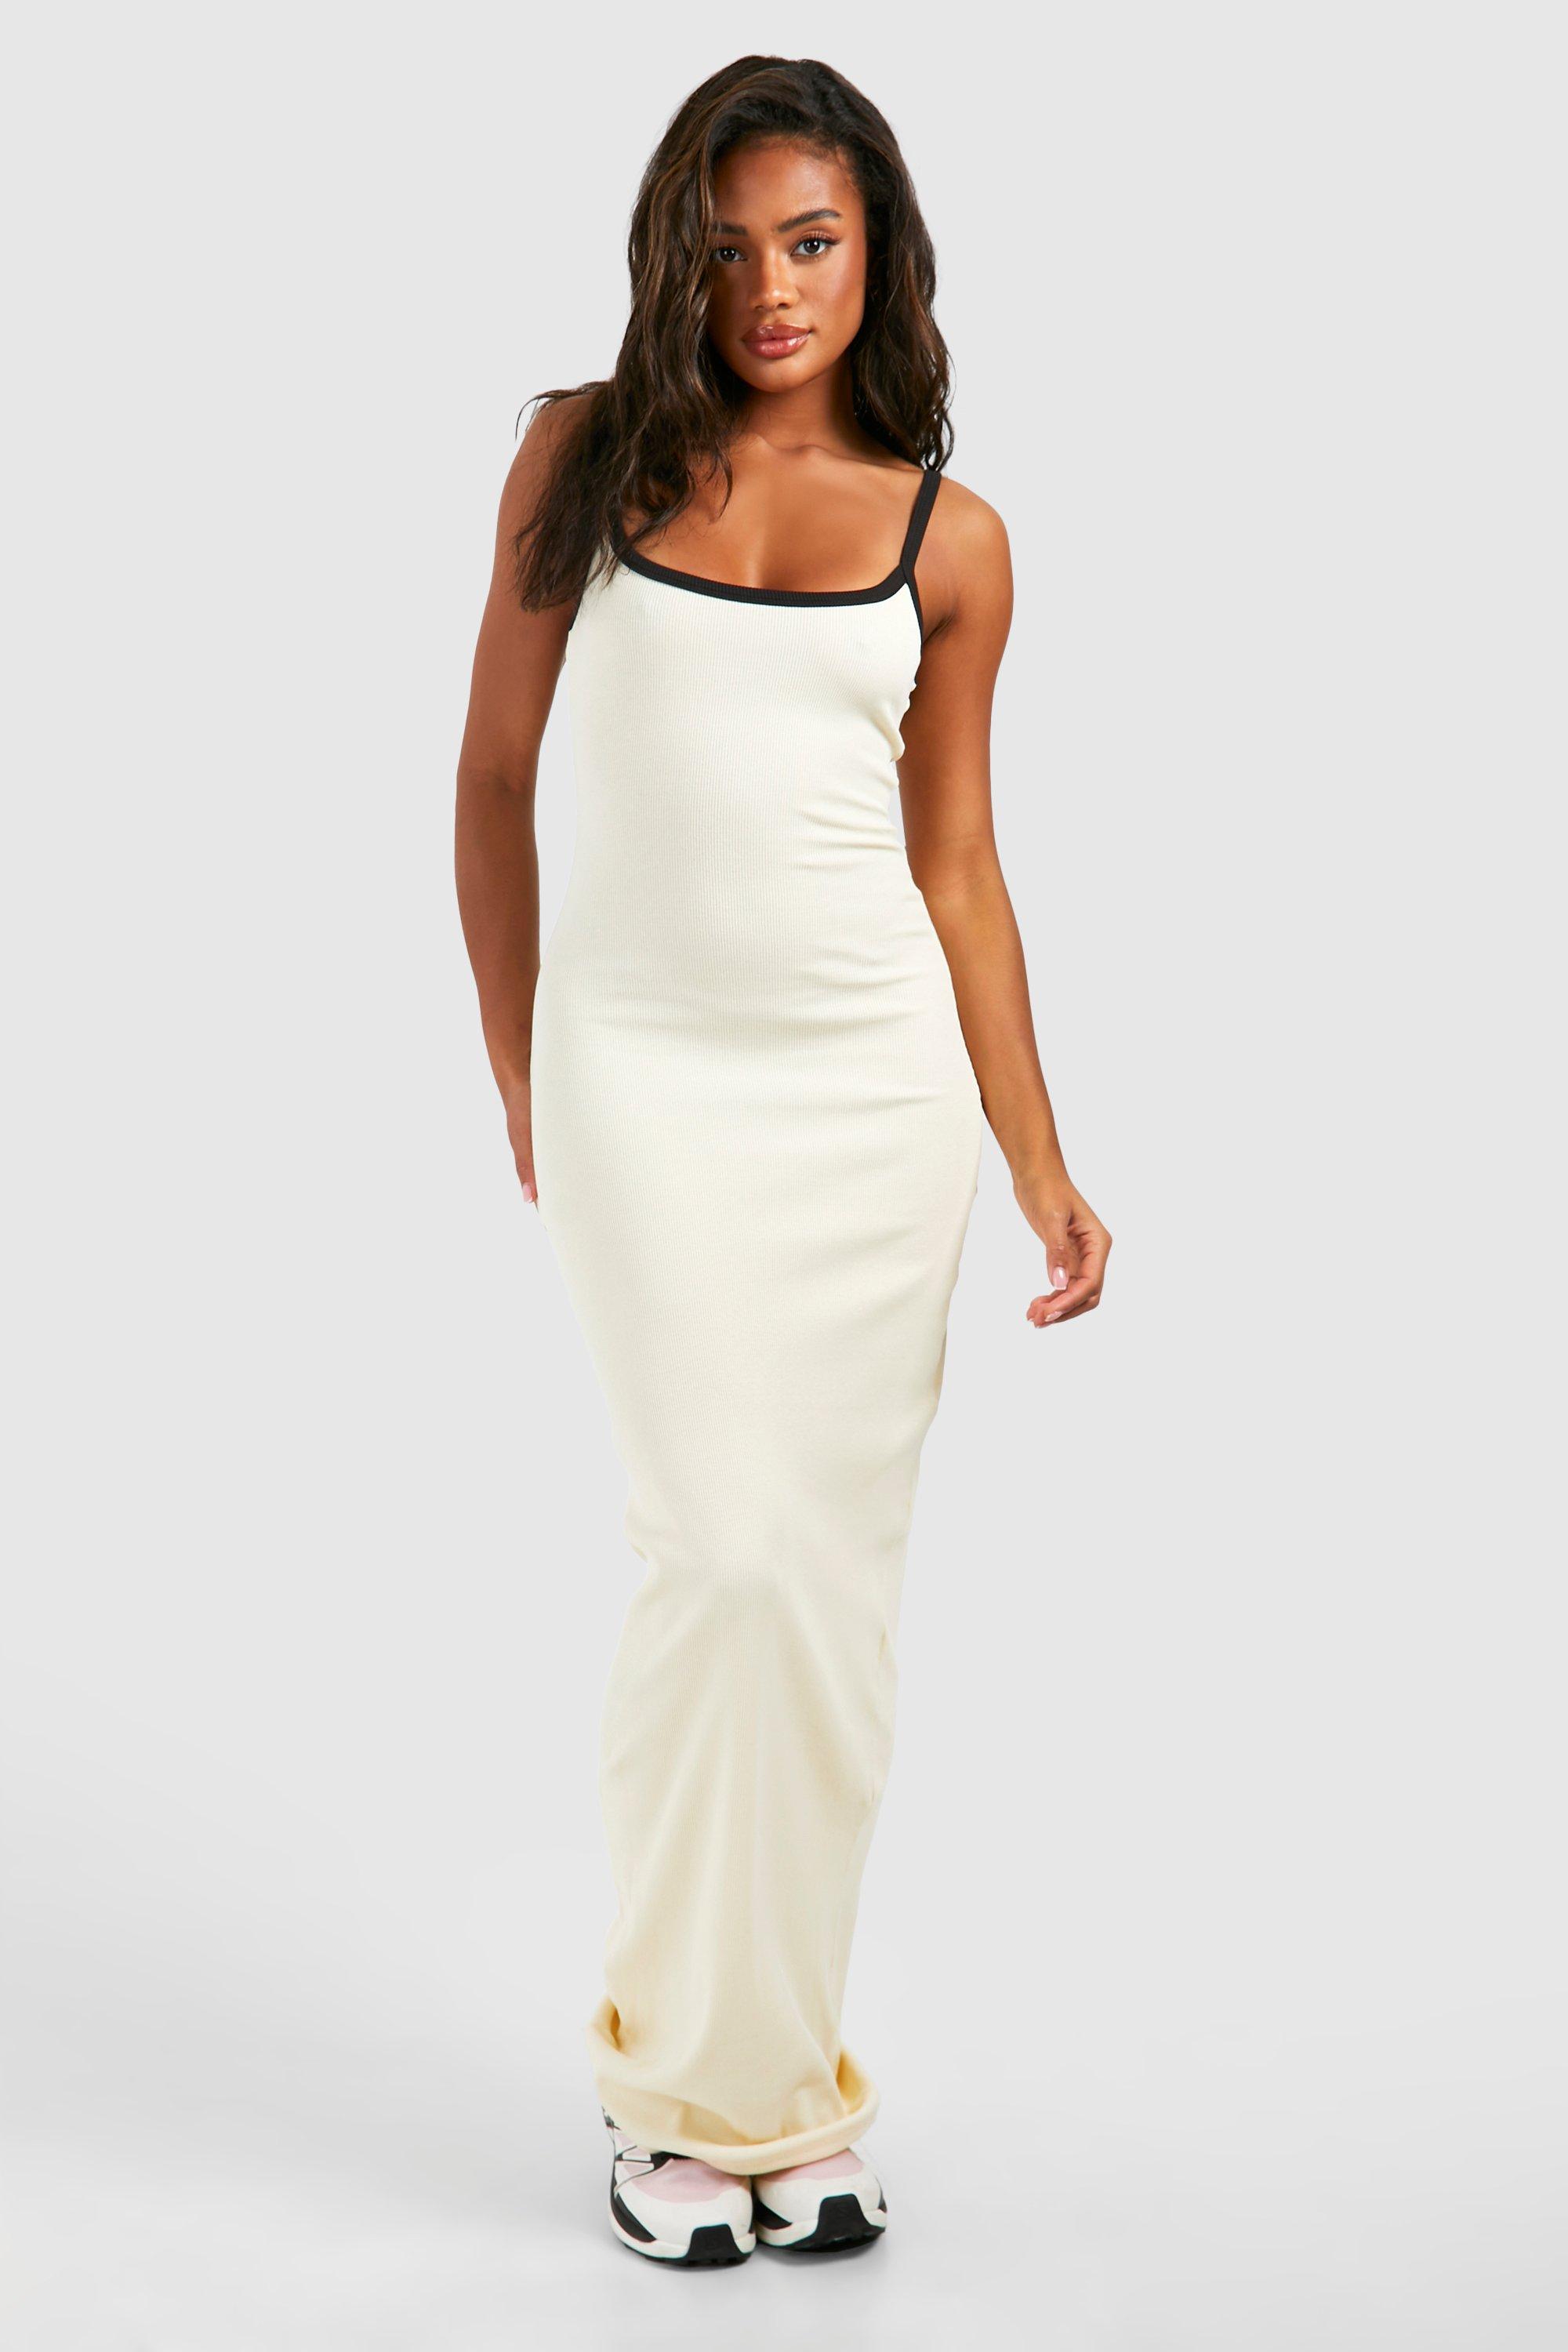 Contrast Binding Strappy Maxi Dress - White - 10